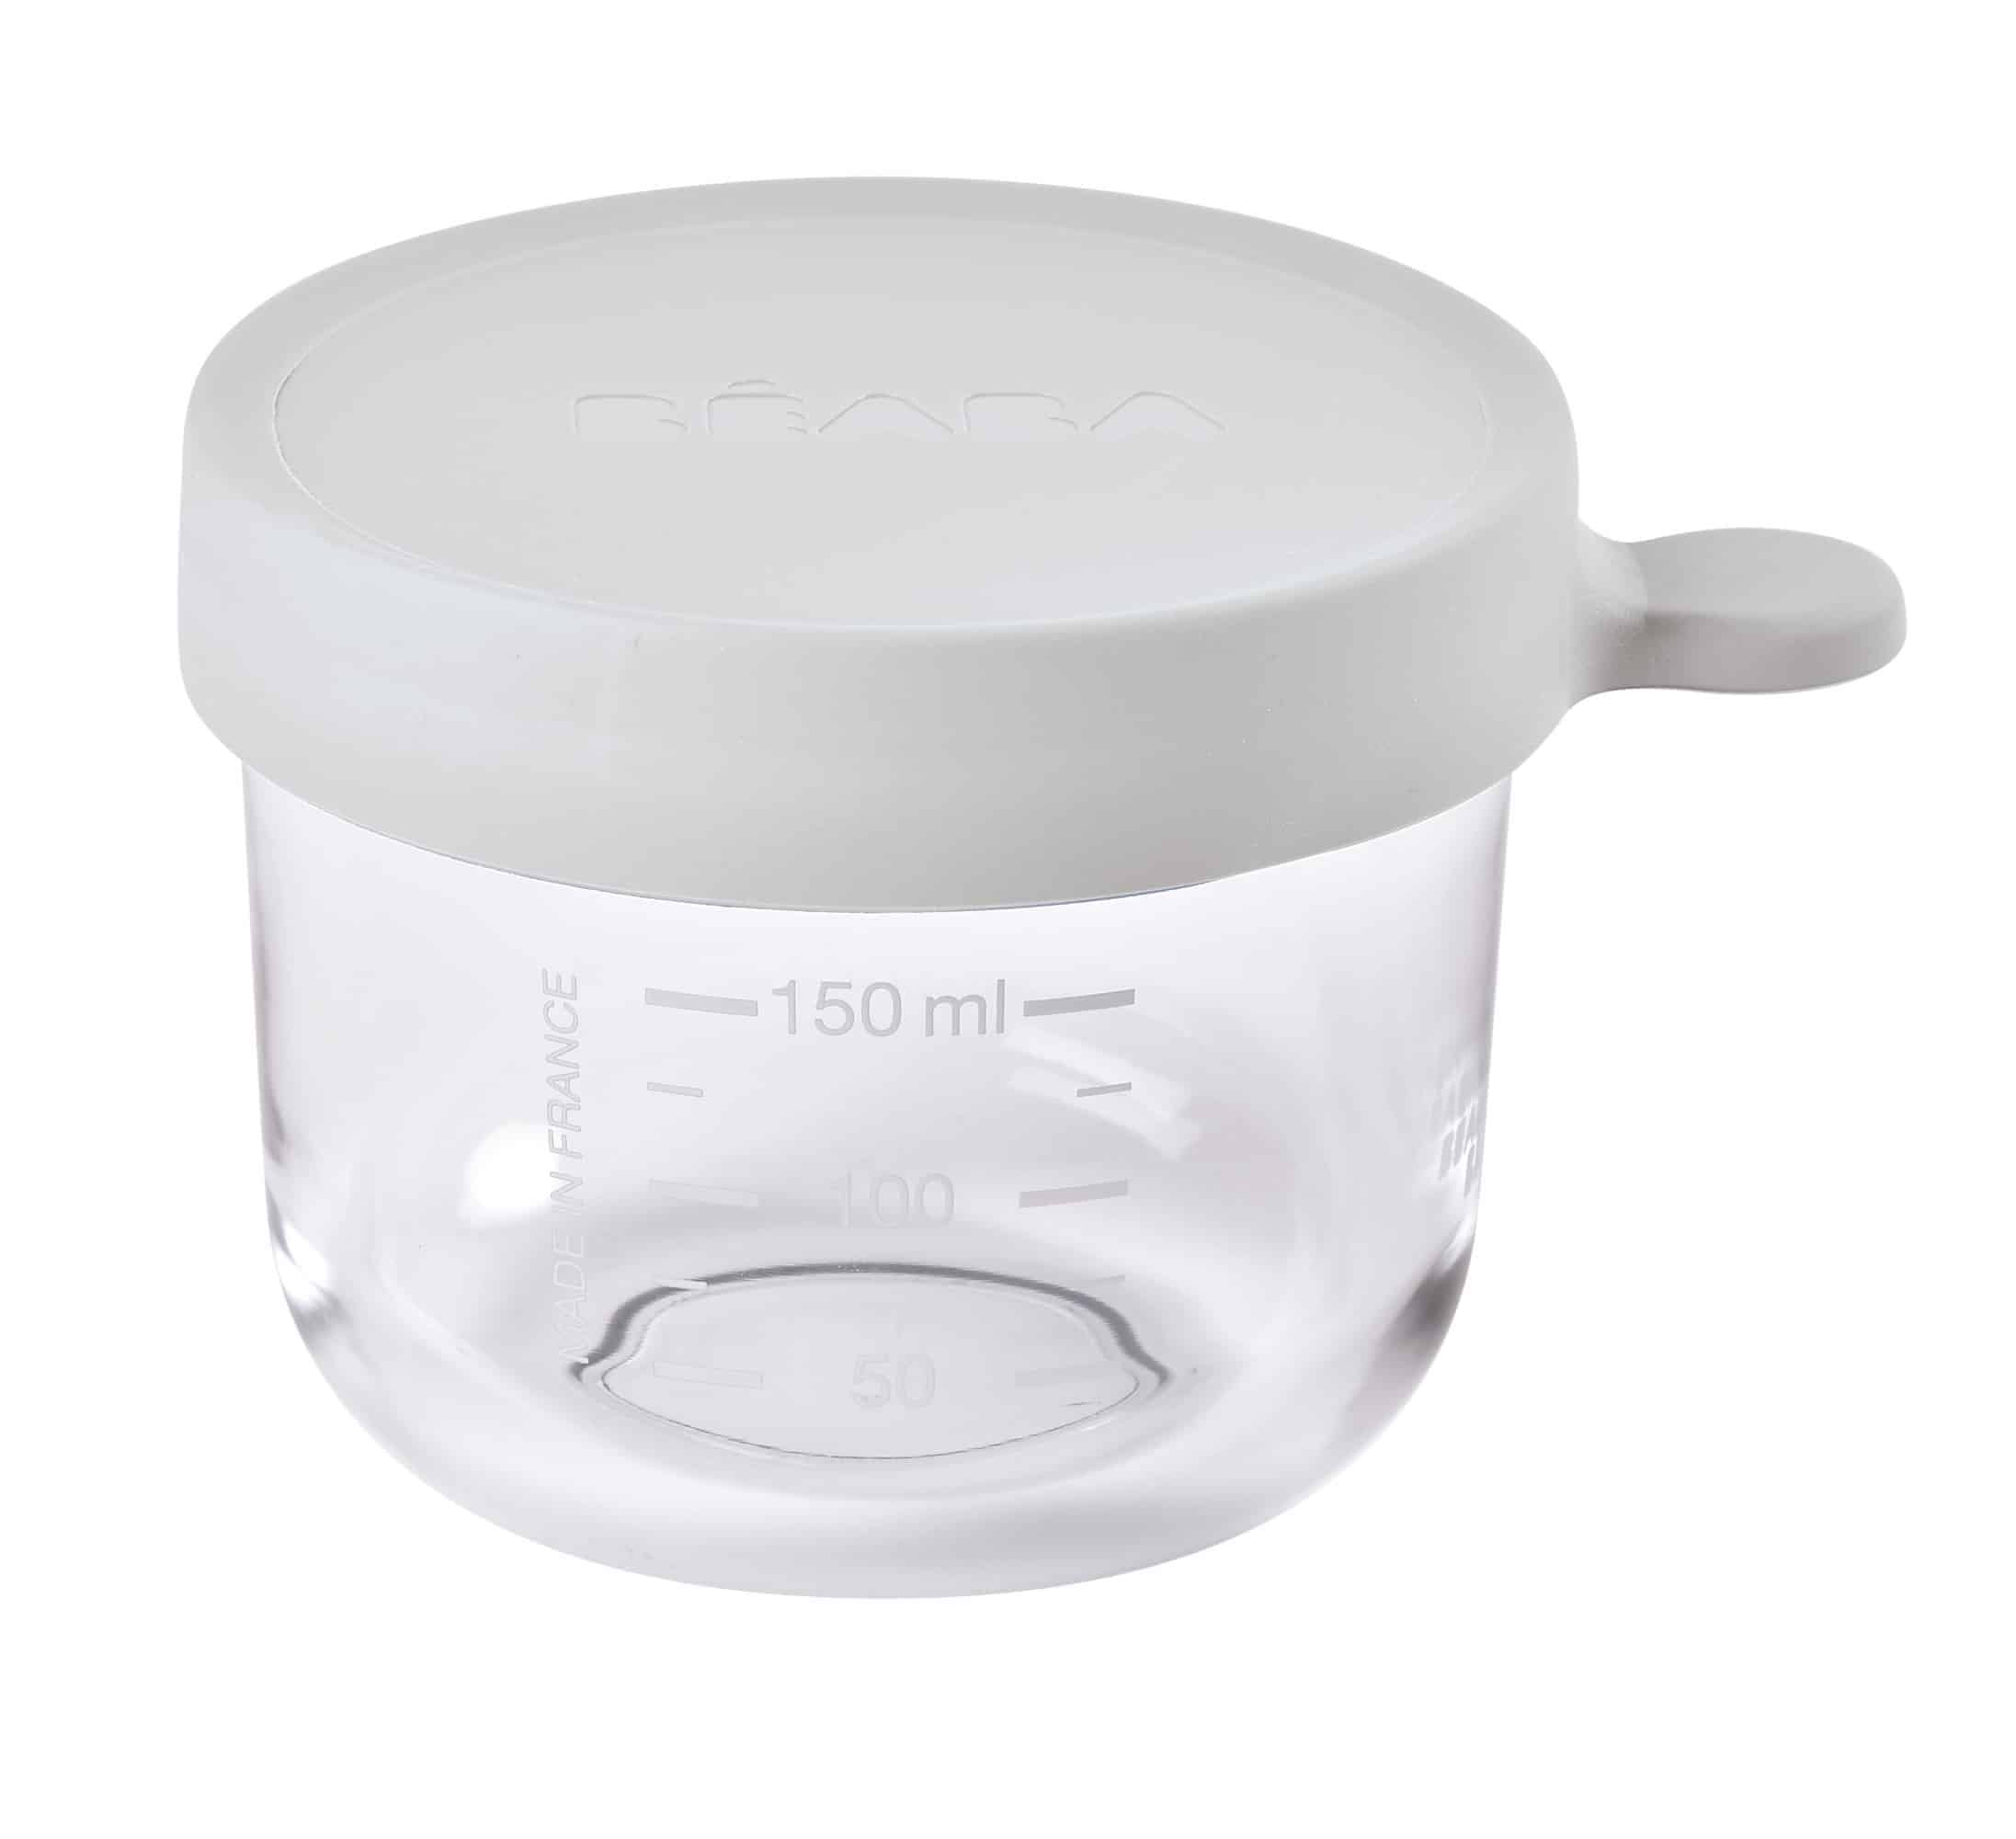 Beaba glass and silicone Container in Cloud 5 oz